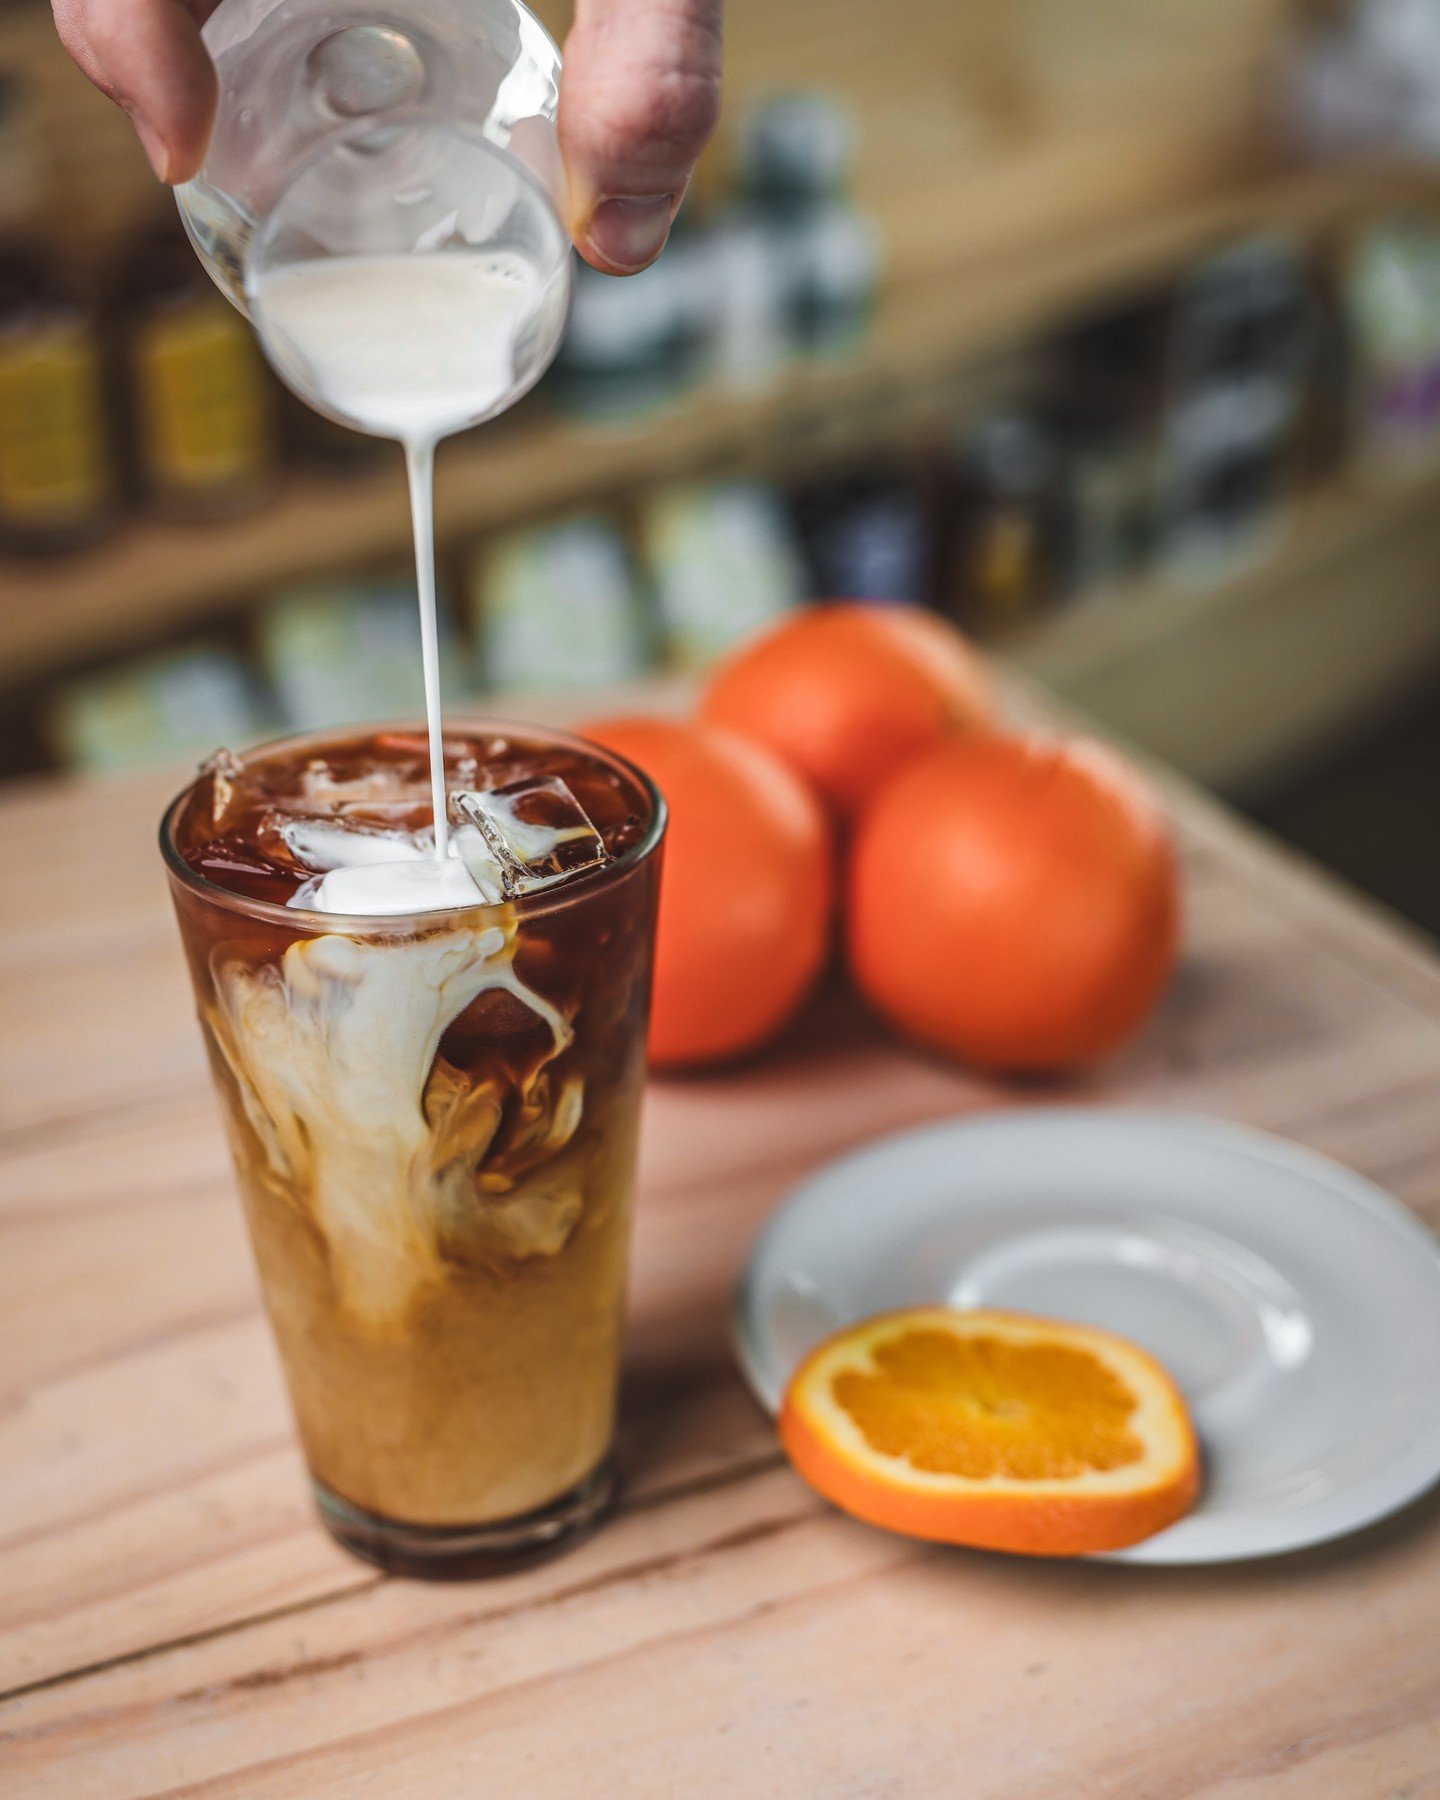 Satisfy your sweet tooth with our refreshing Orange Creamsicle Cold Brew! 🍊🥤
ㅤ
This delicious beverage combines the bold, smooth taste of cold brew coffee with the creamy, dreamy flavors of orange and vanilla.
Stop by Lighthouse Coffee &amp; Wine i